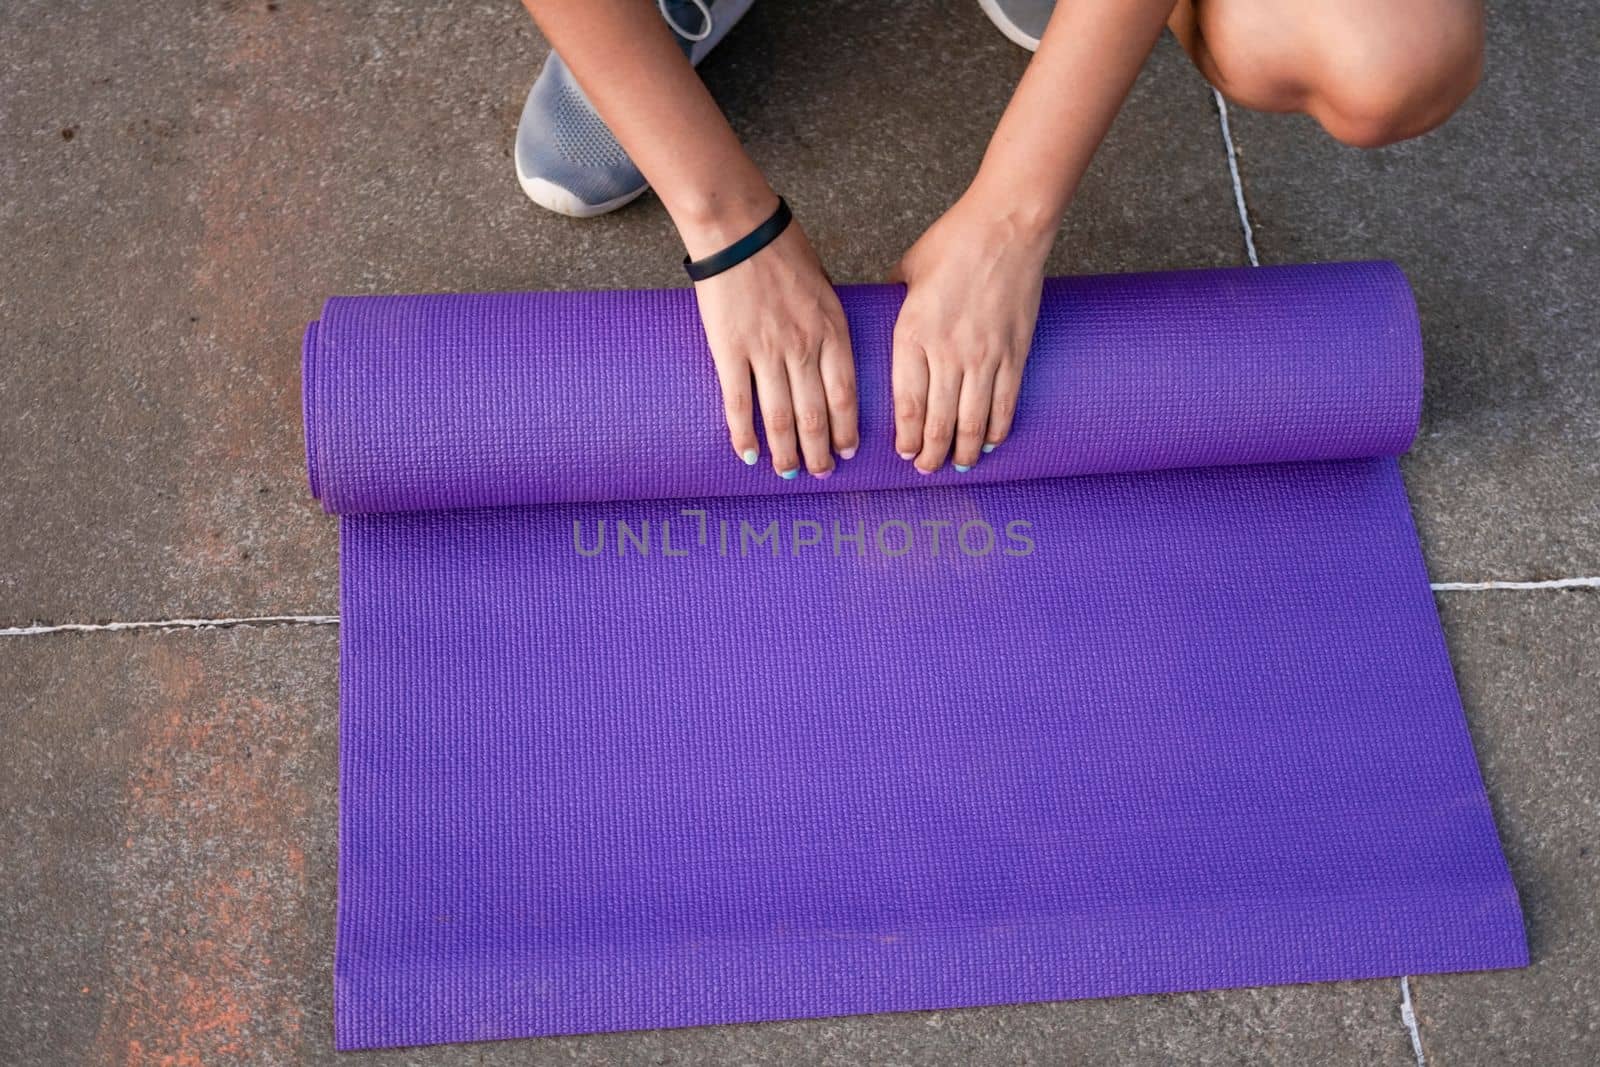 Woman hands rolling up the mat outside. Athlete woman's hands rolling up the mat after exercising. Concept of rolling up mat after exercise